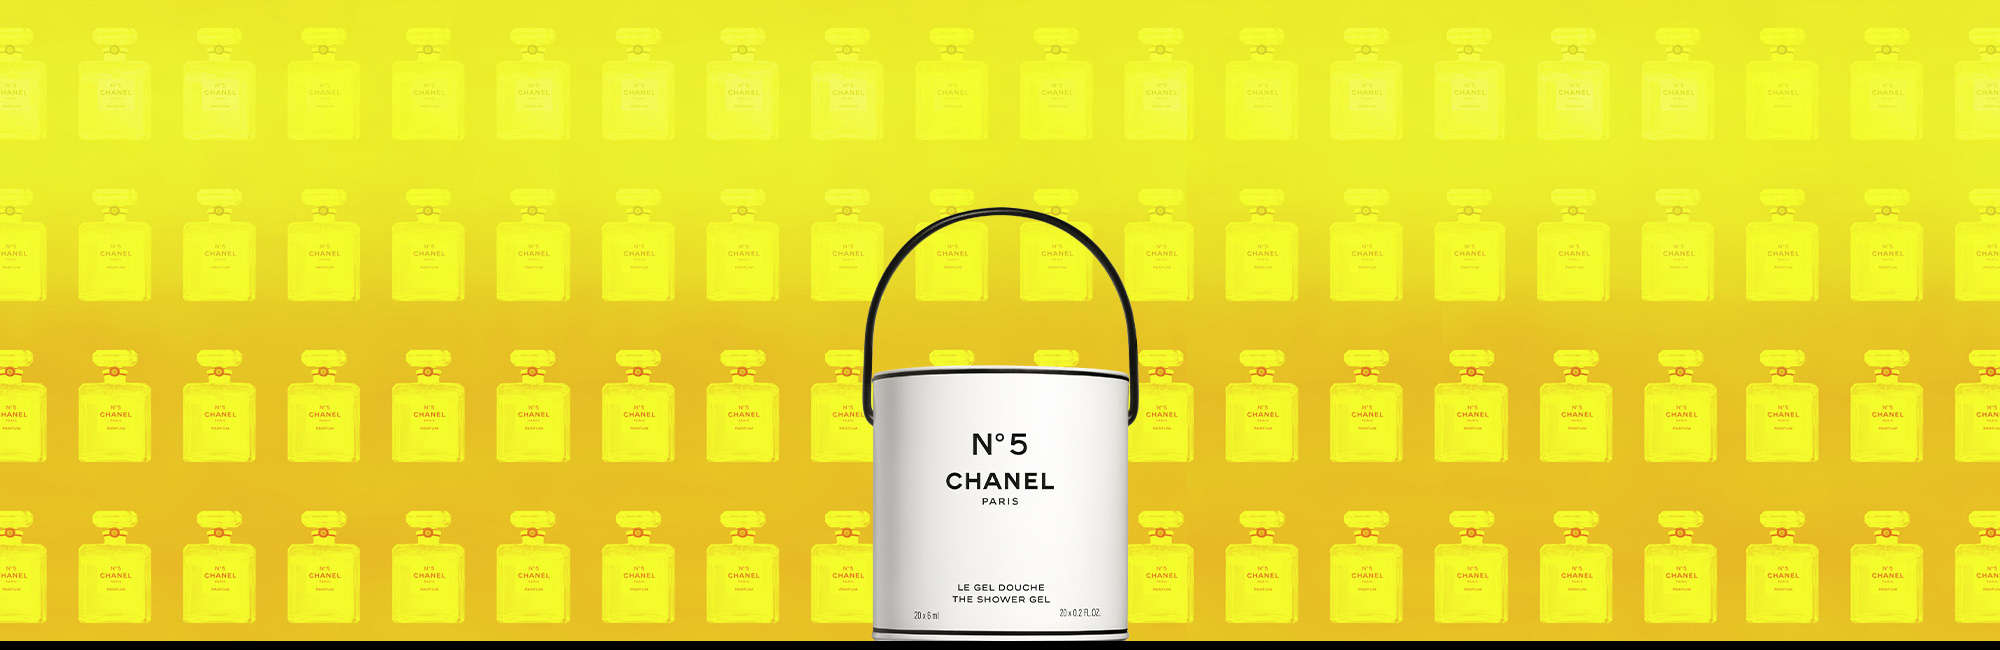 chanel no 5 shower curtain